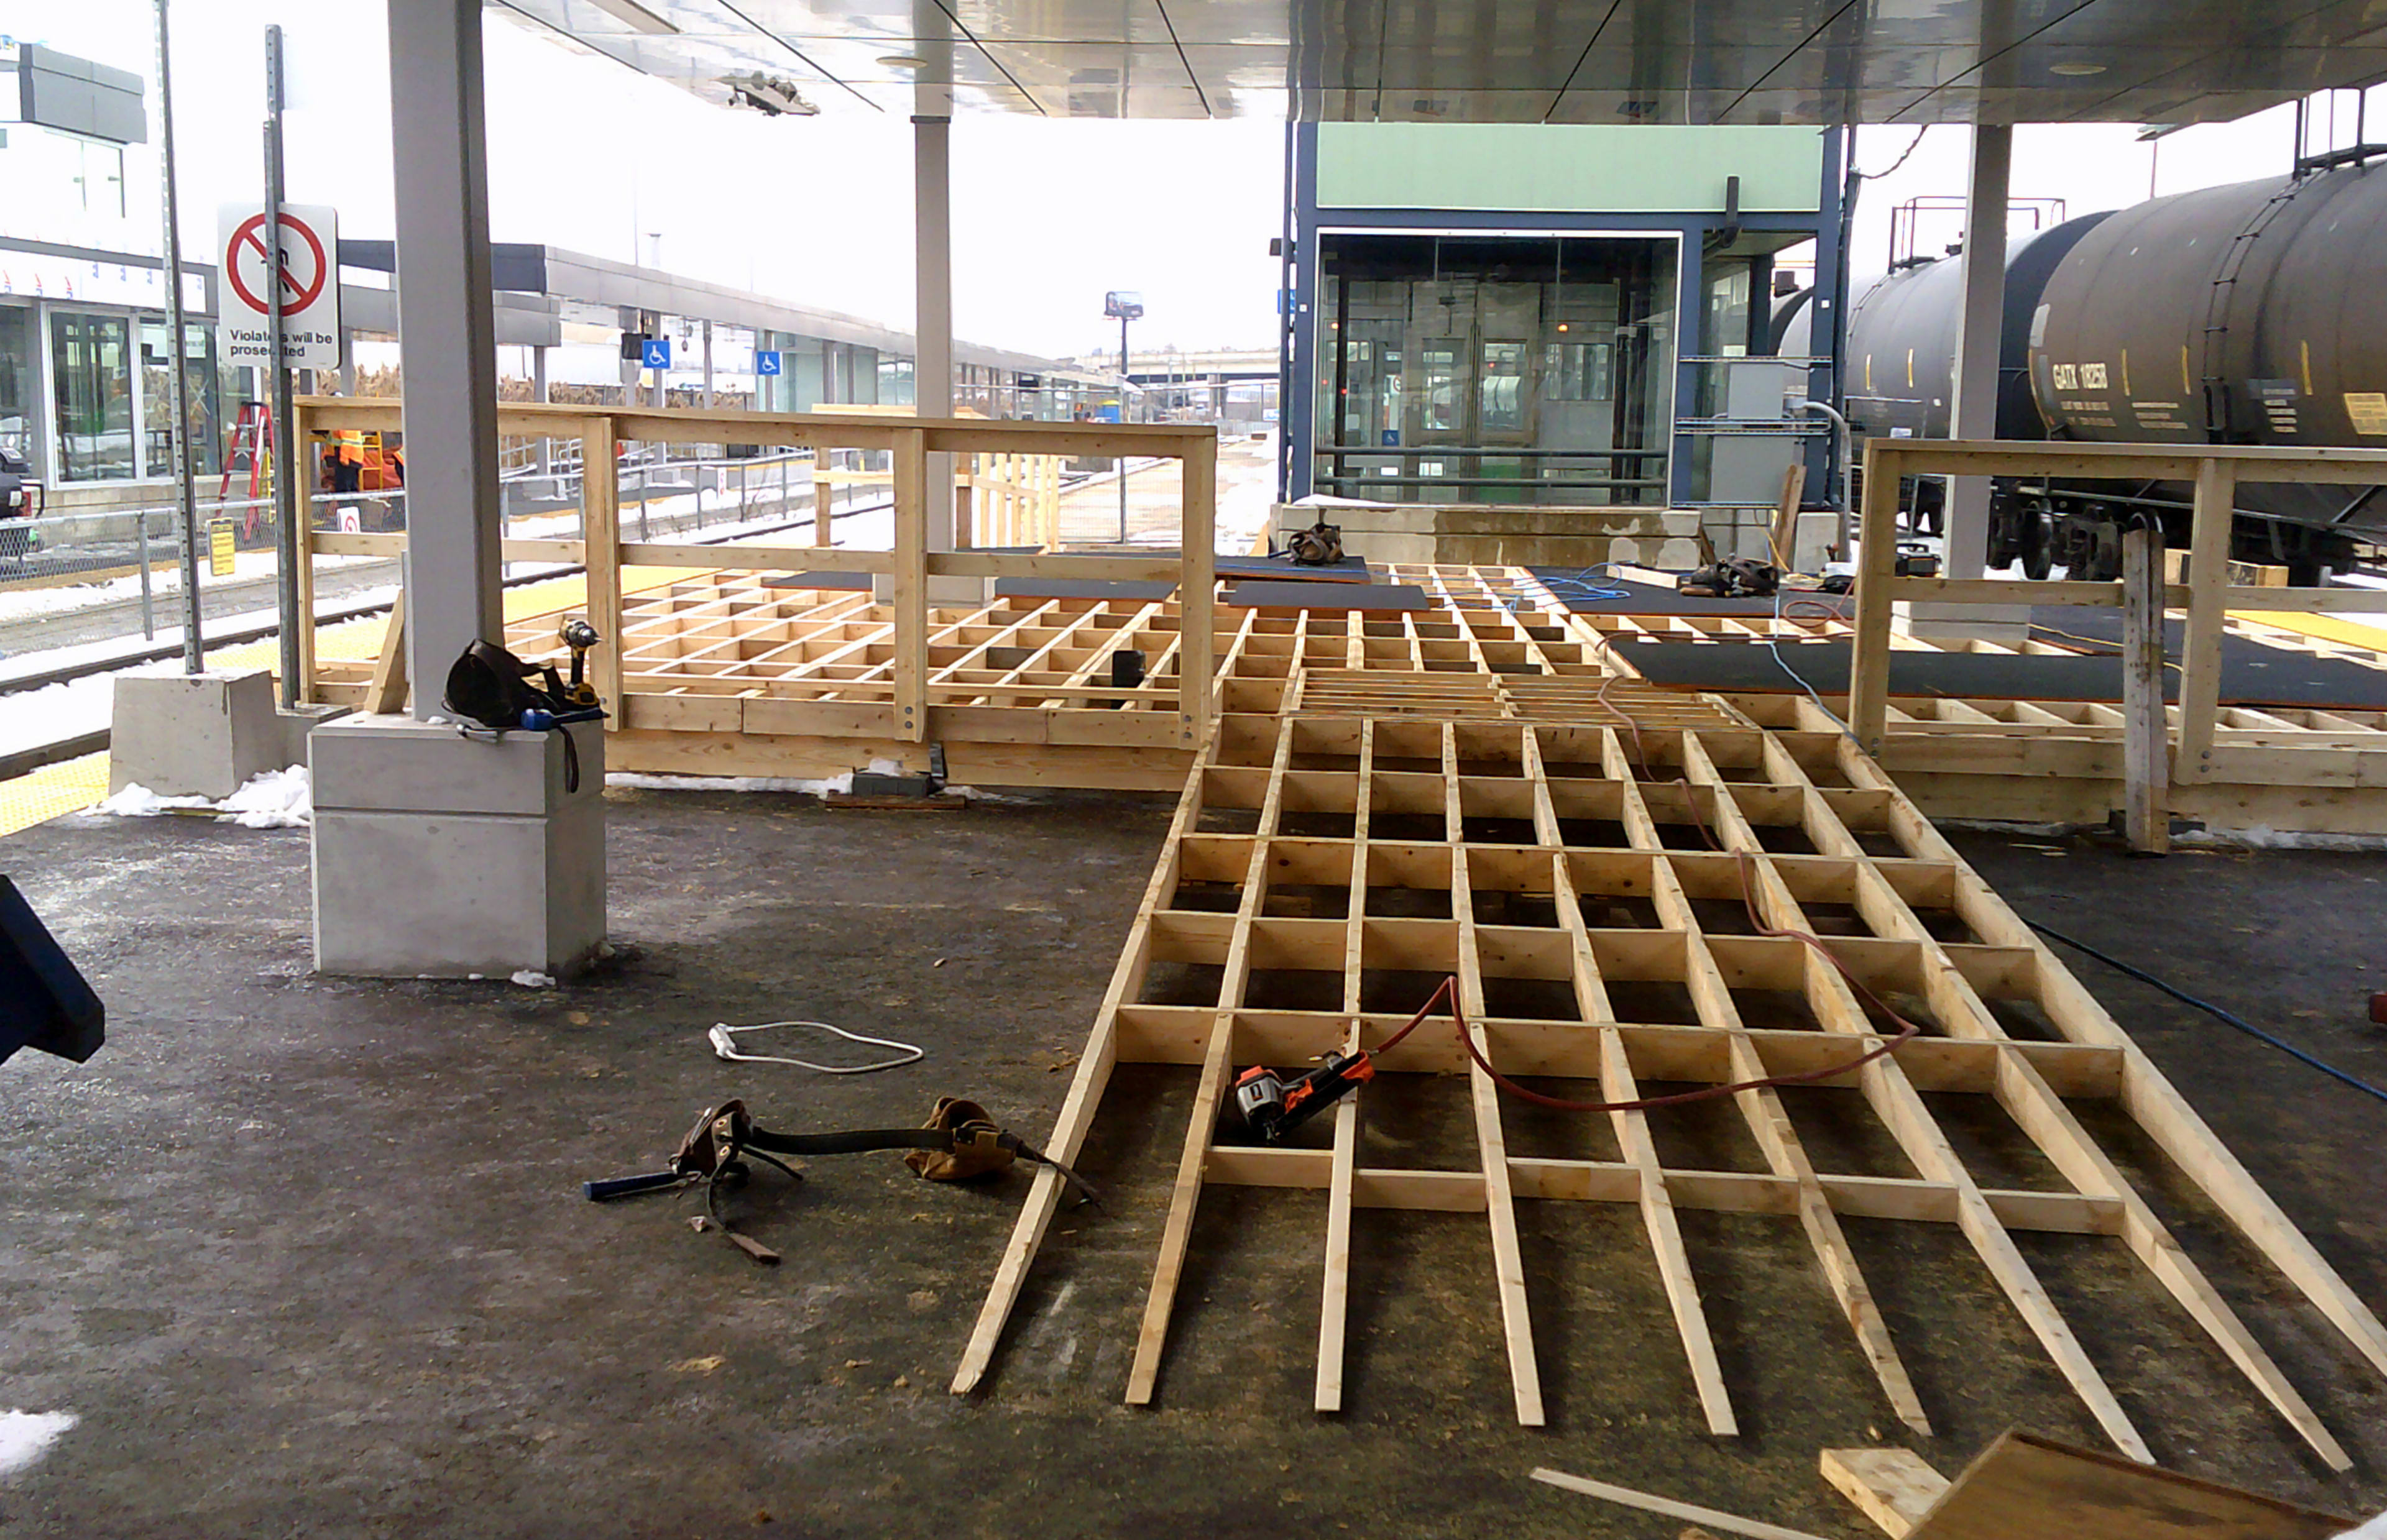 A new temporary mini ramp is being constructed on the platform for the upcoming platform changes.